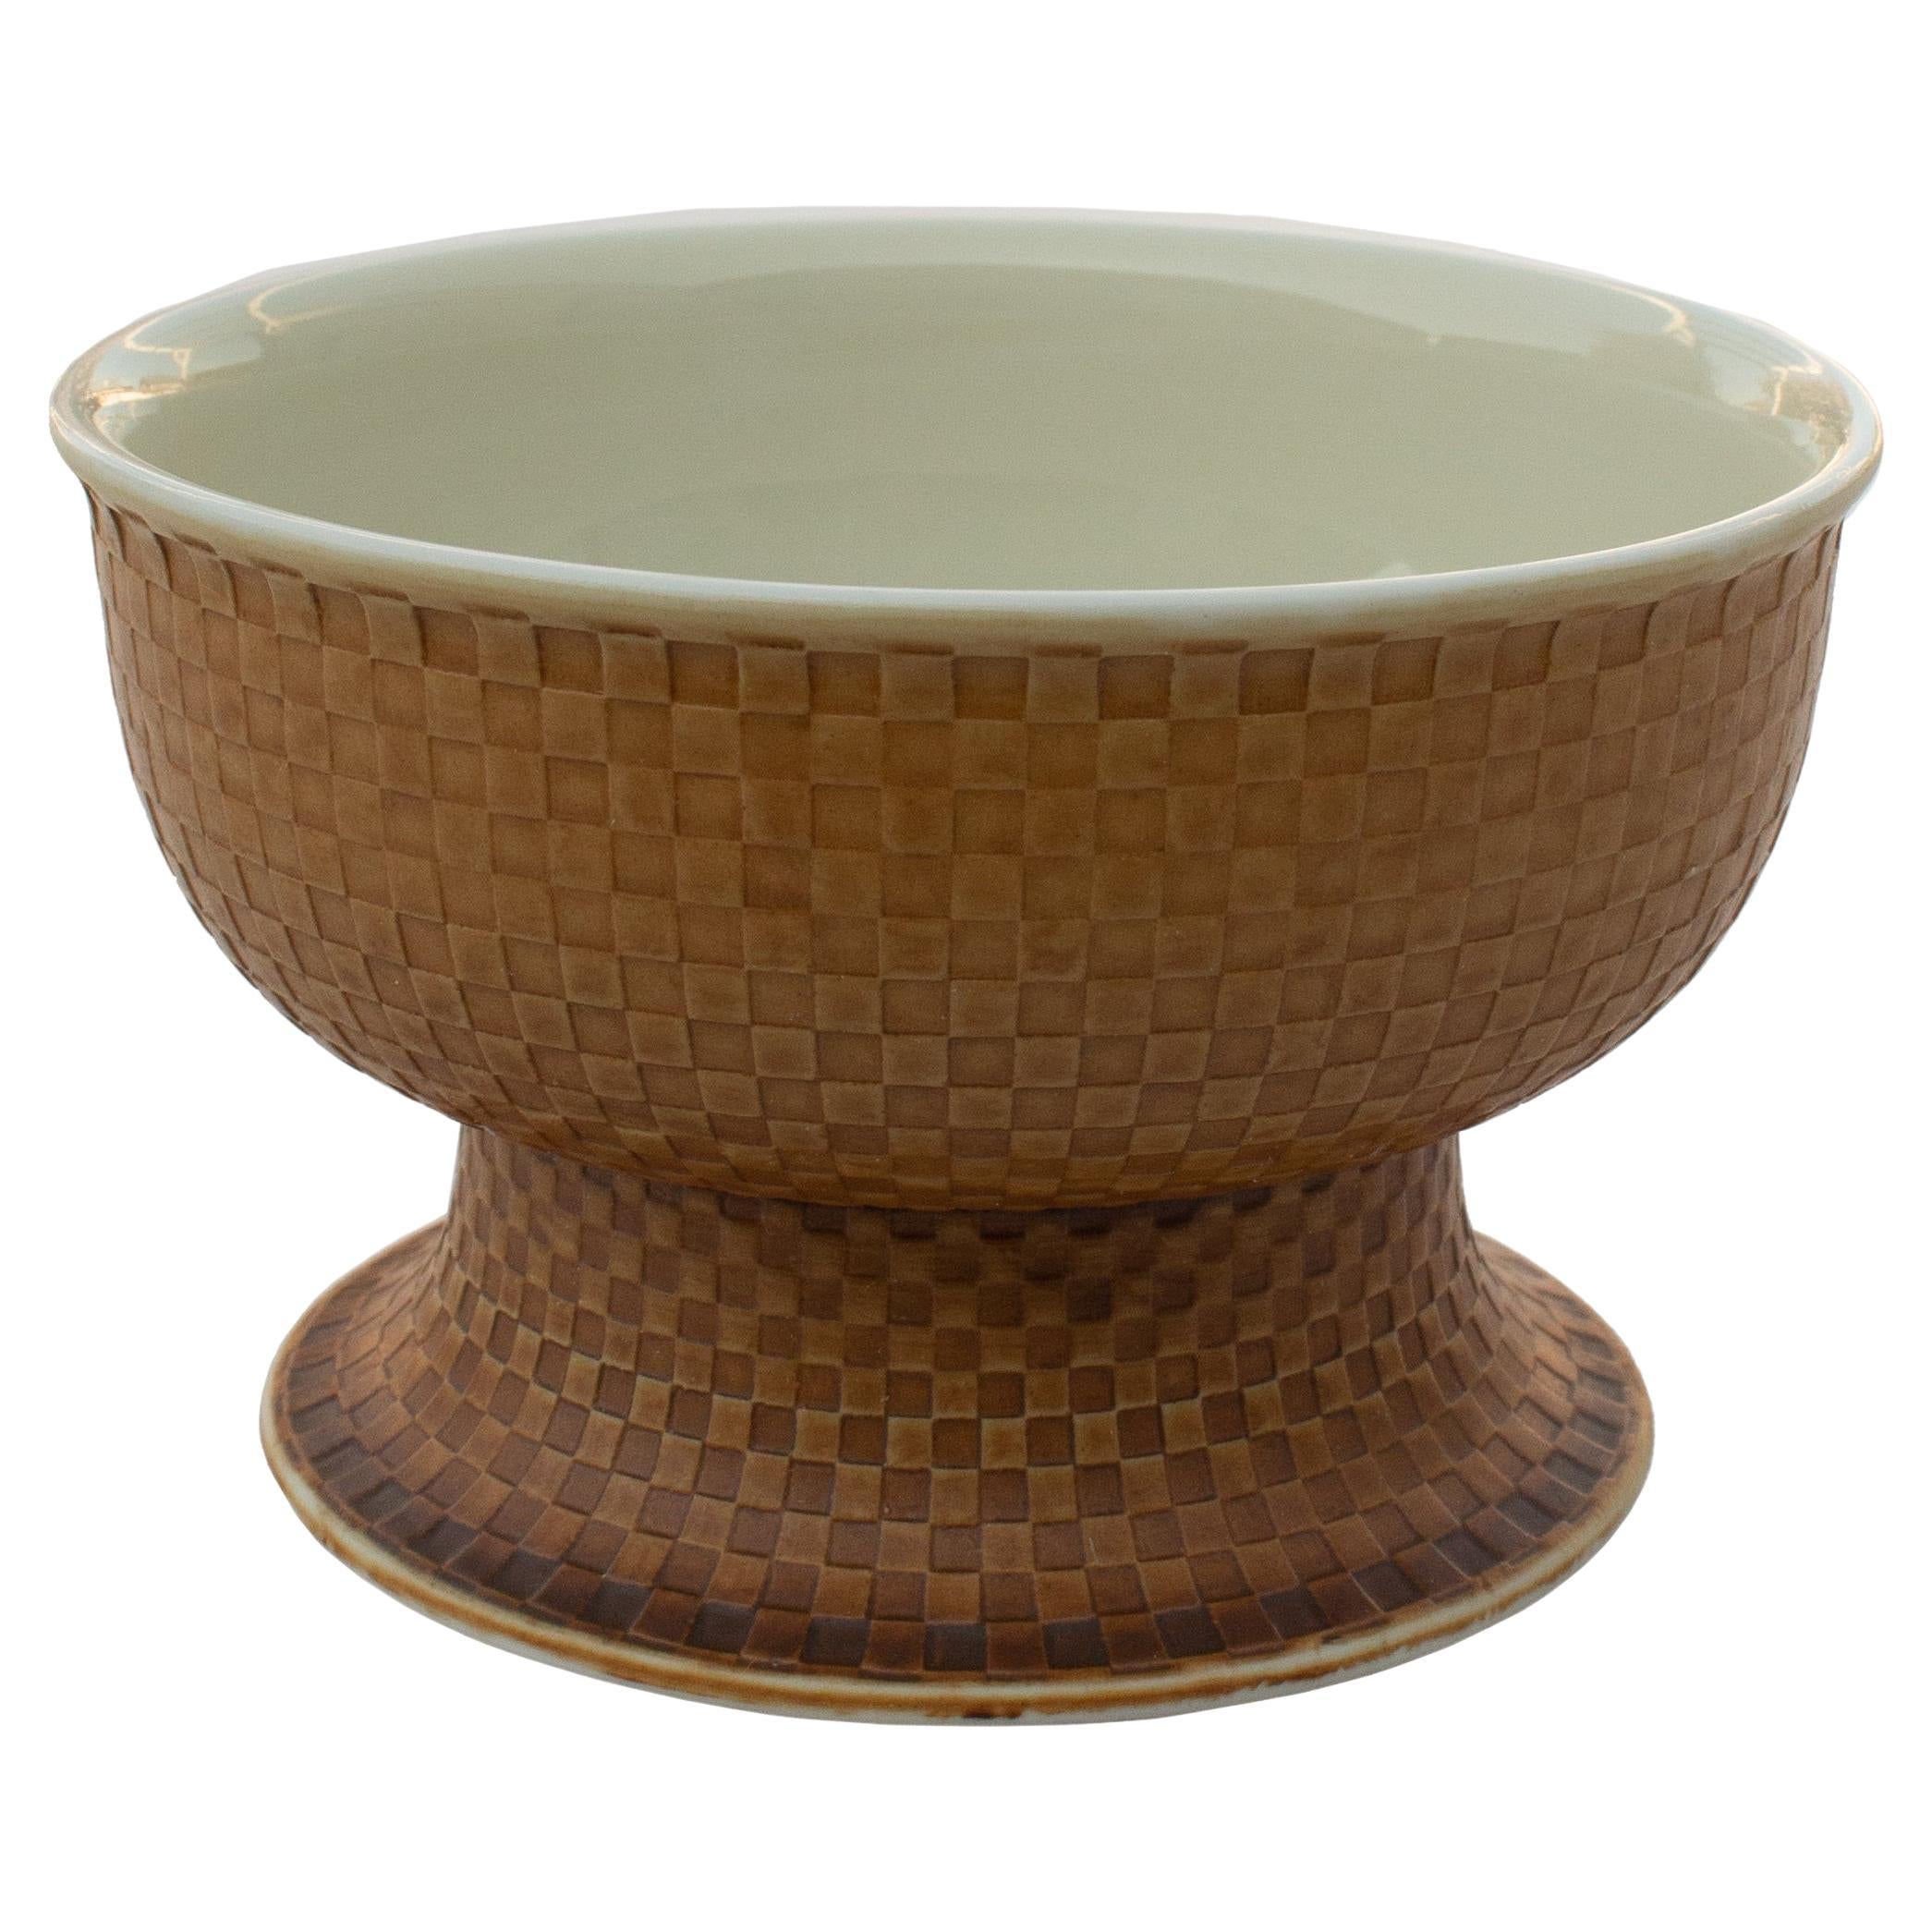 12 Bowls with Terracotta Glaze by Signe Persson Melin for Boda Nova, Sweden For Sale